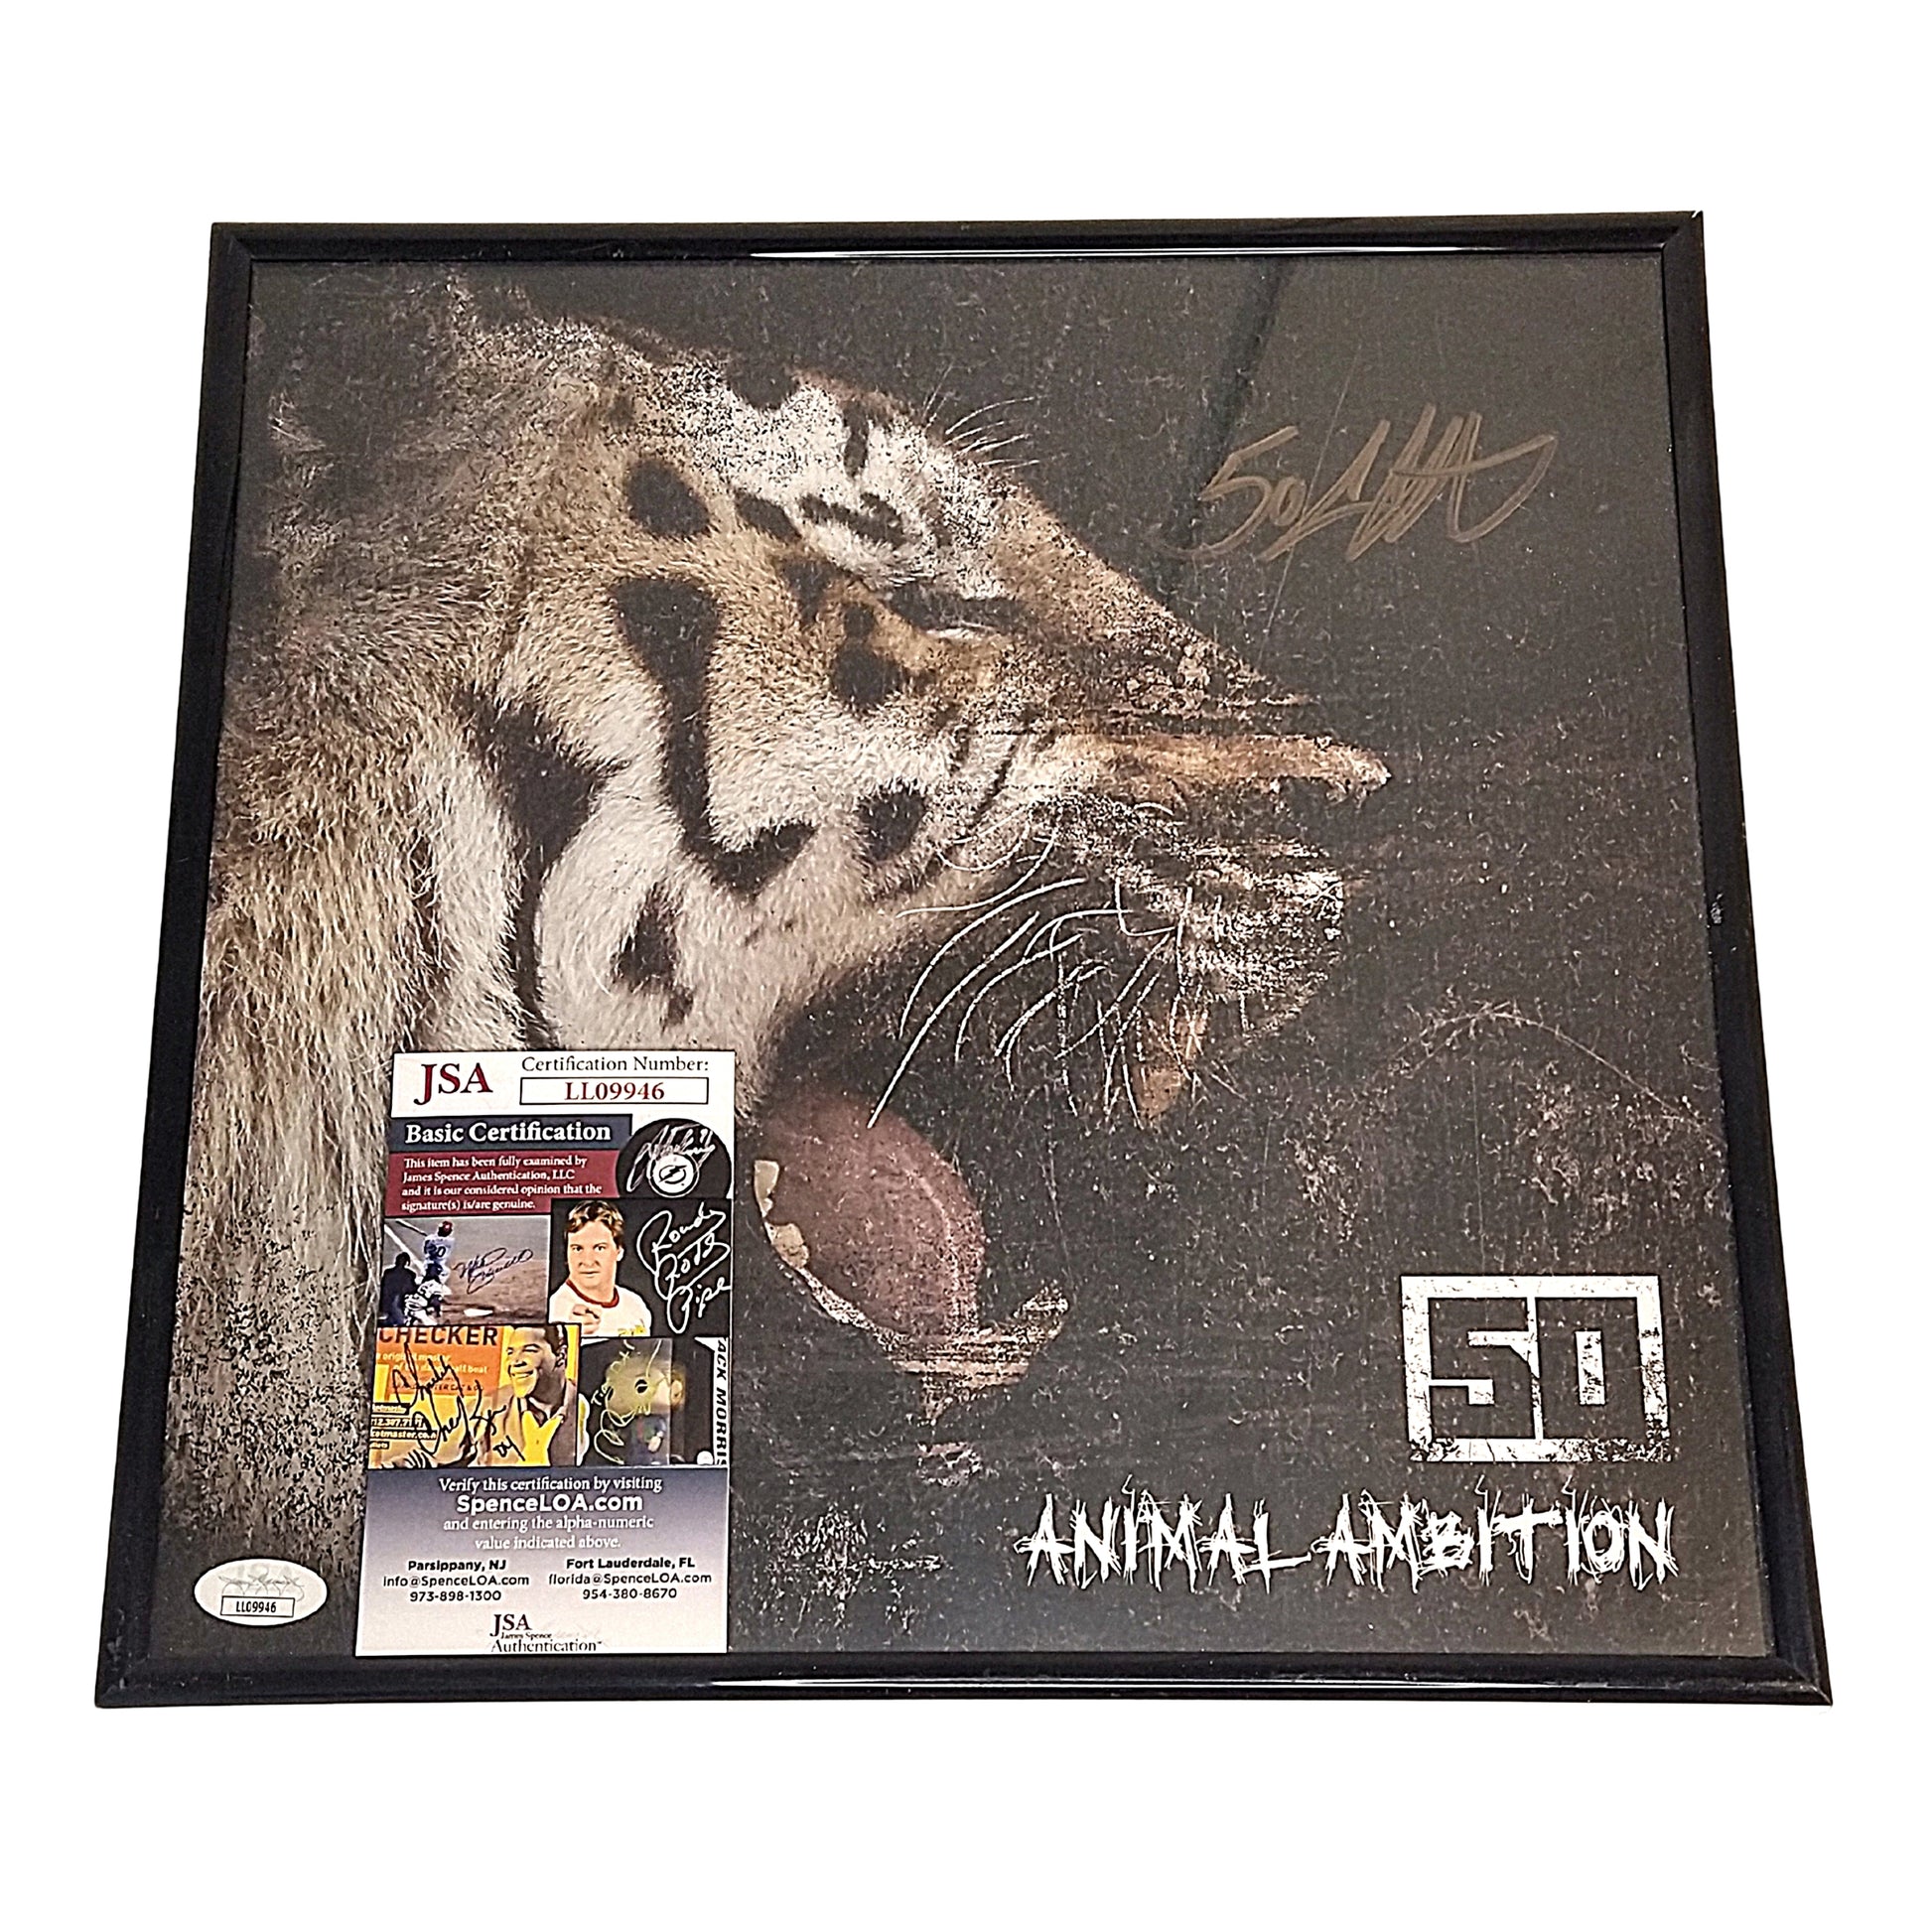 Music- Autographed- 50 Cent Signed Animal Ambition 12x12 Inch Record Album Print Framed JSA Authentication 103